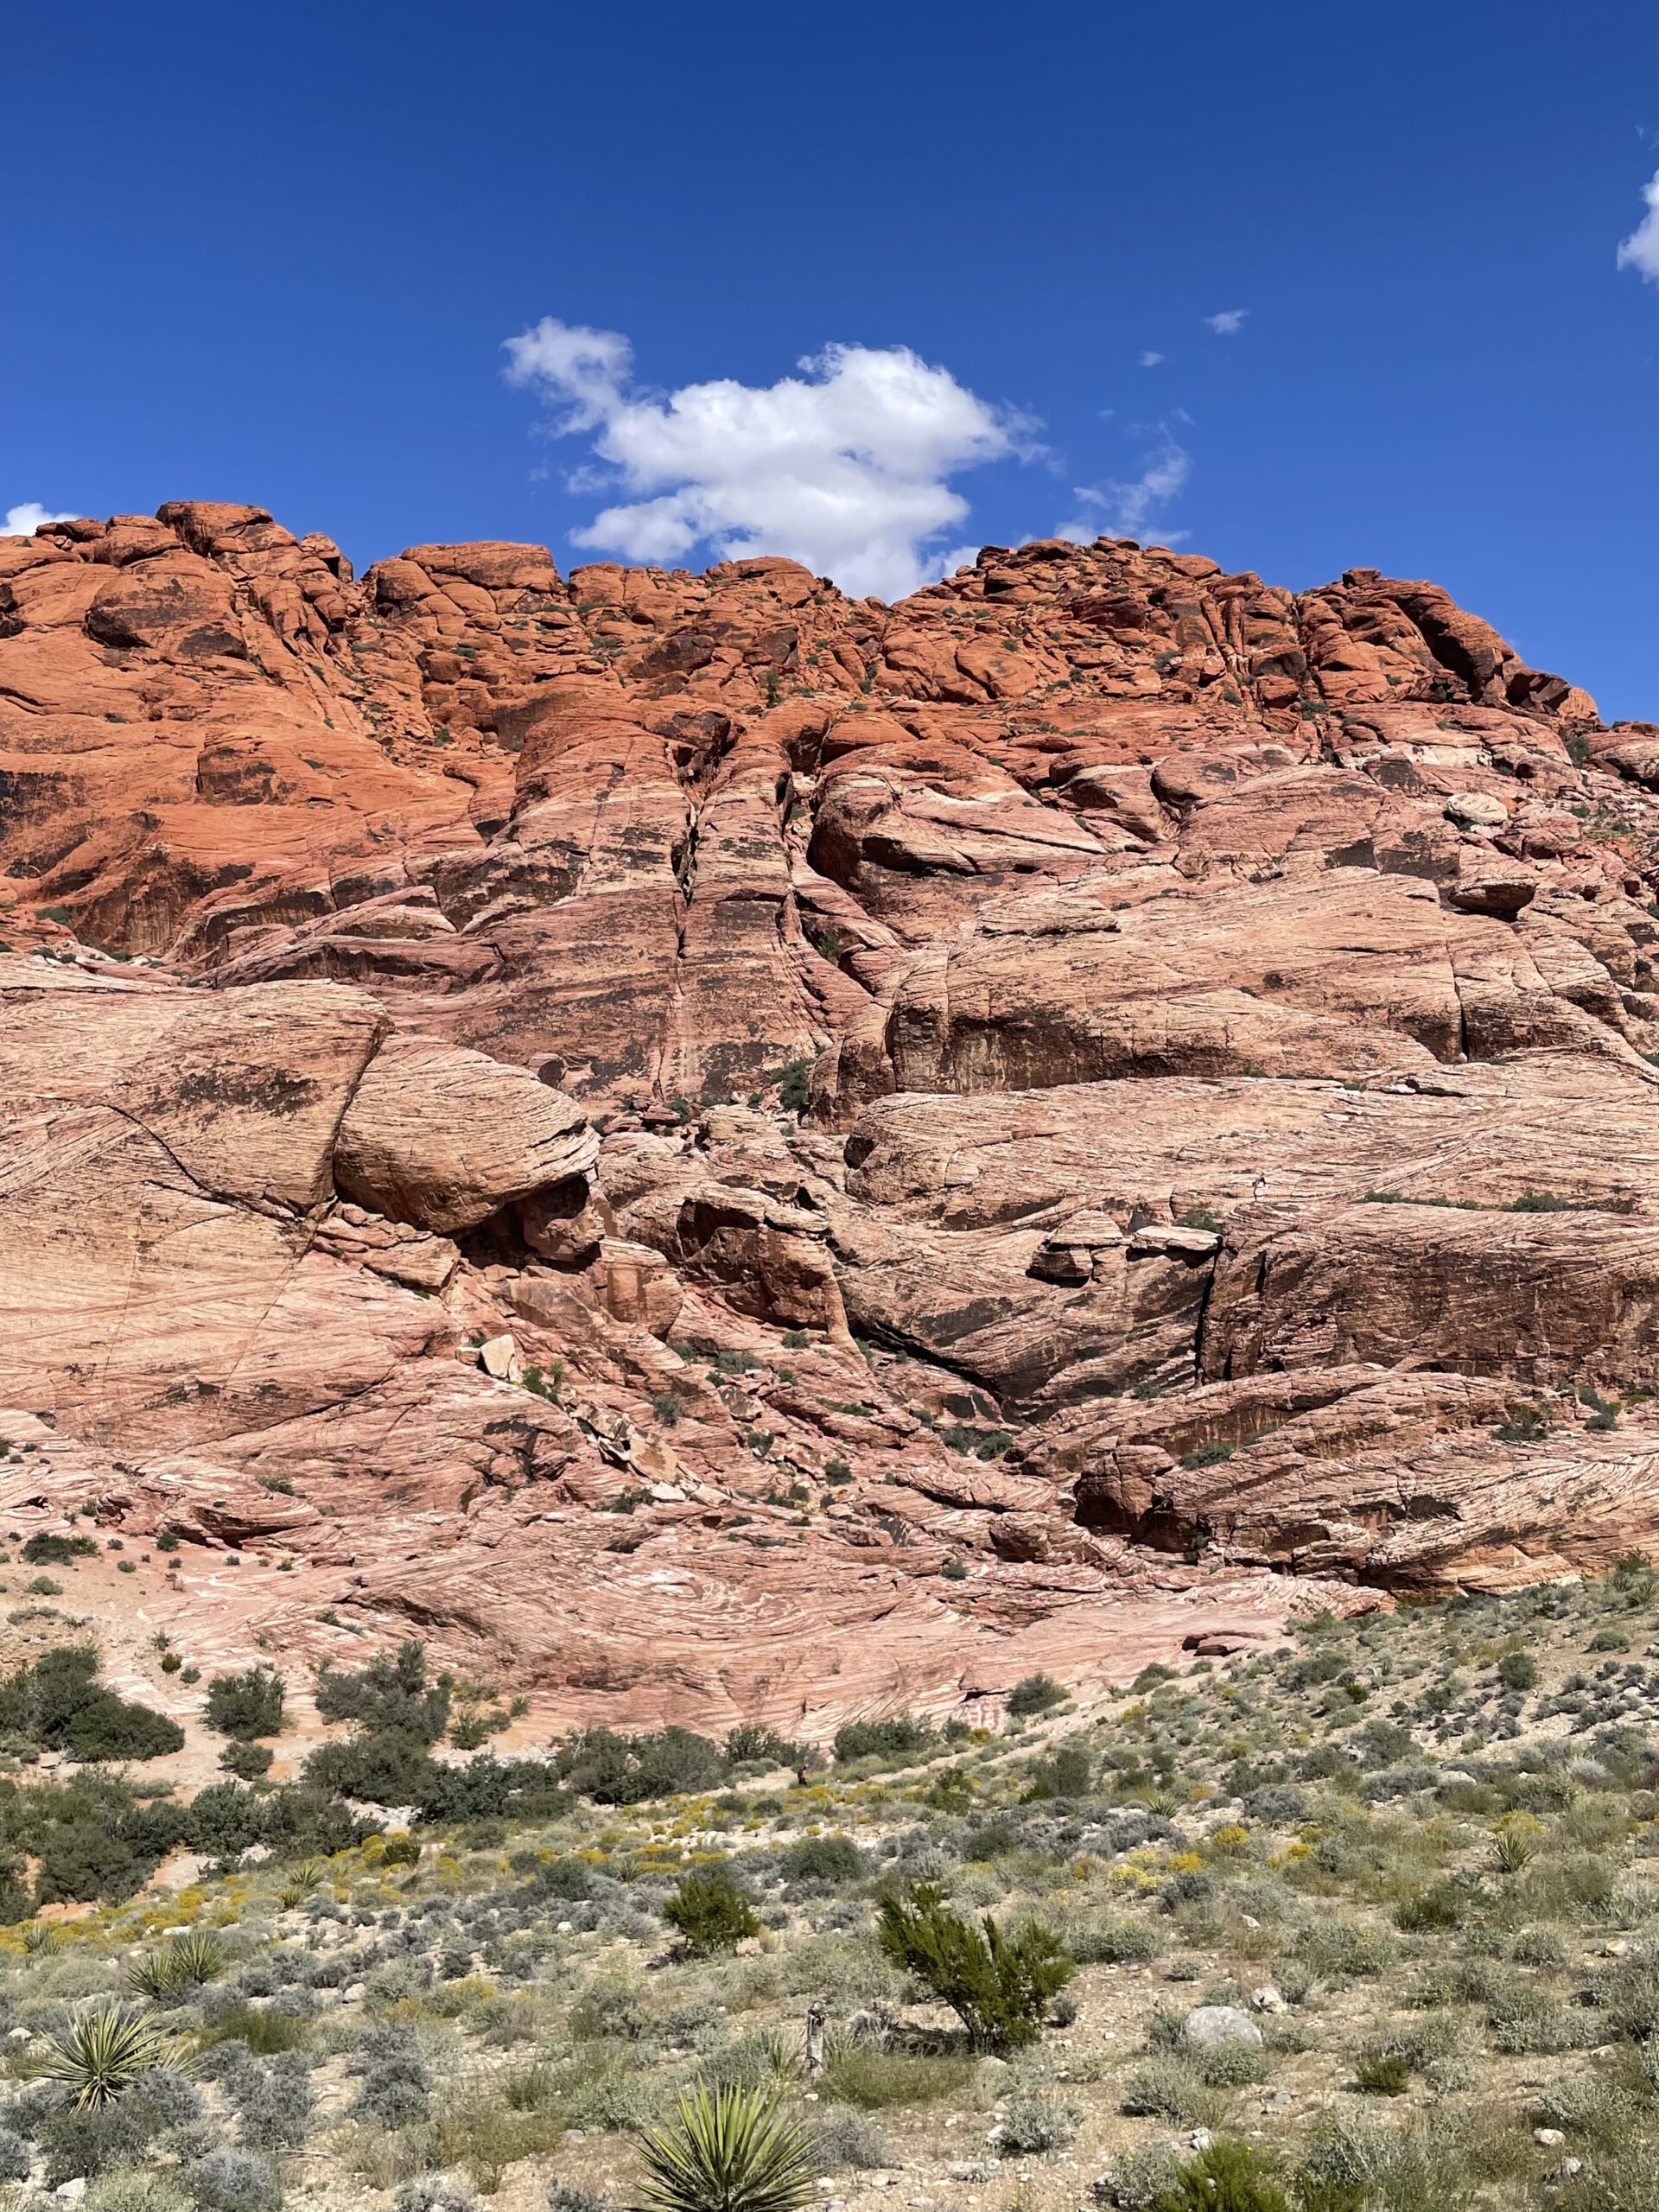 Red Rock canyon national conservation area- free pass for military